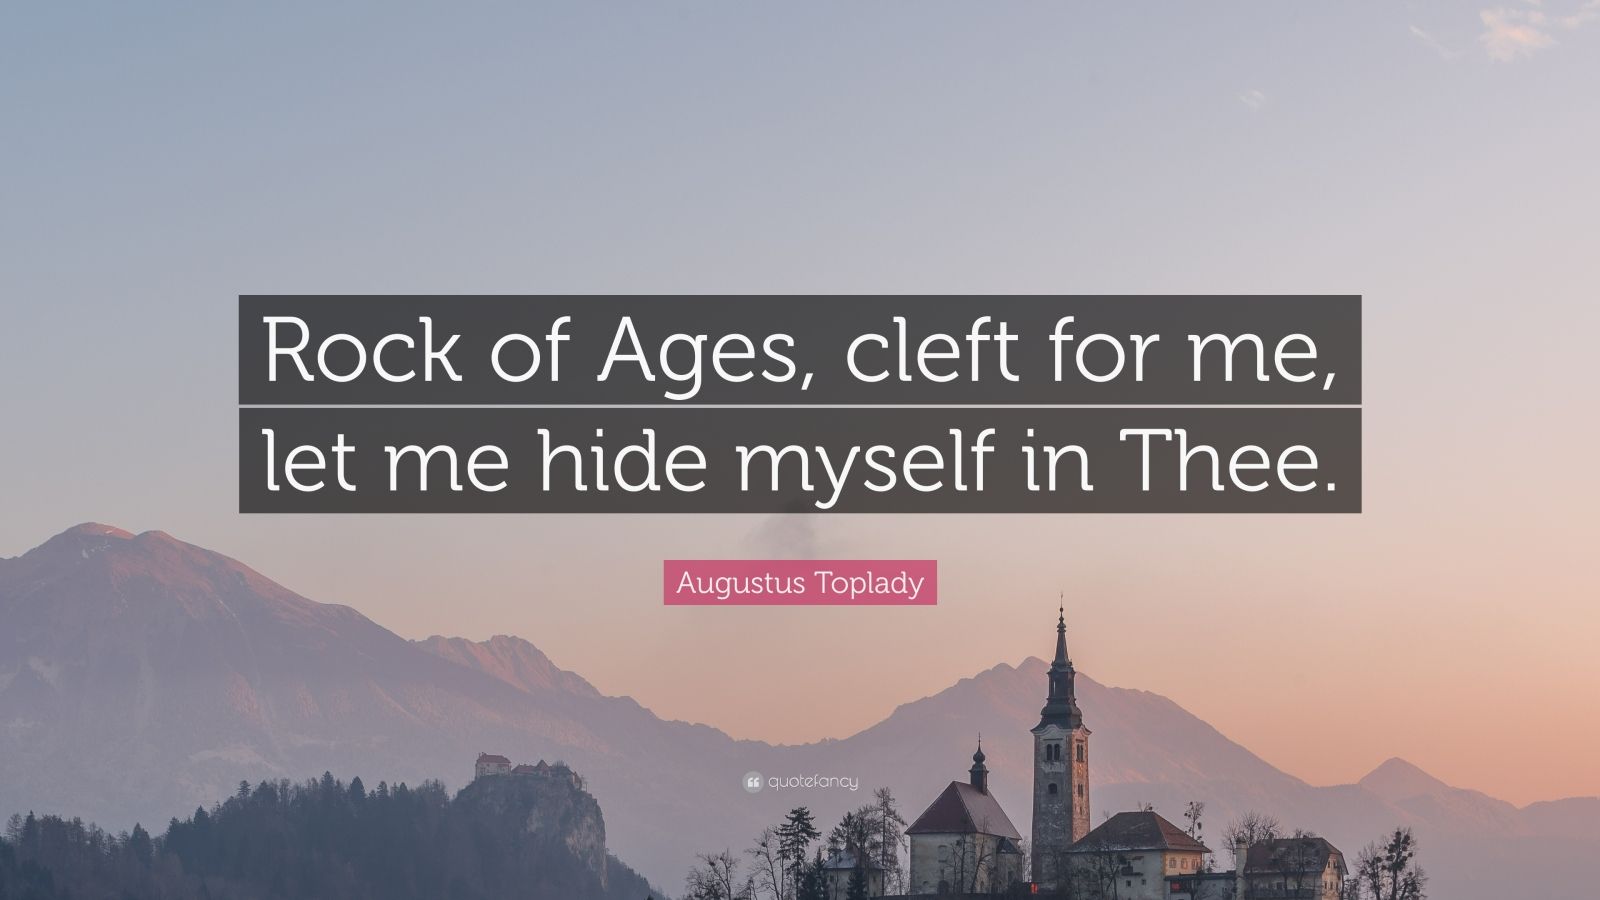 Augustus Toplady Quote “Rock of Ages, cleft for me, let